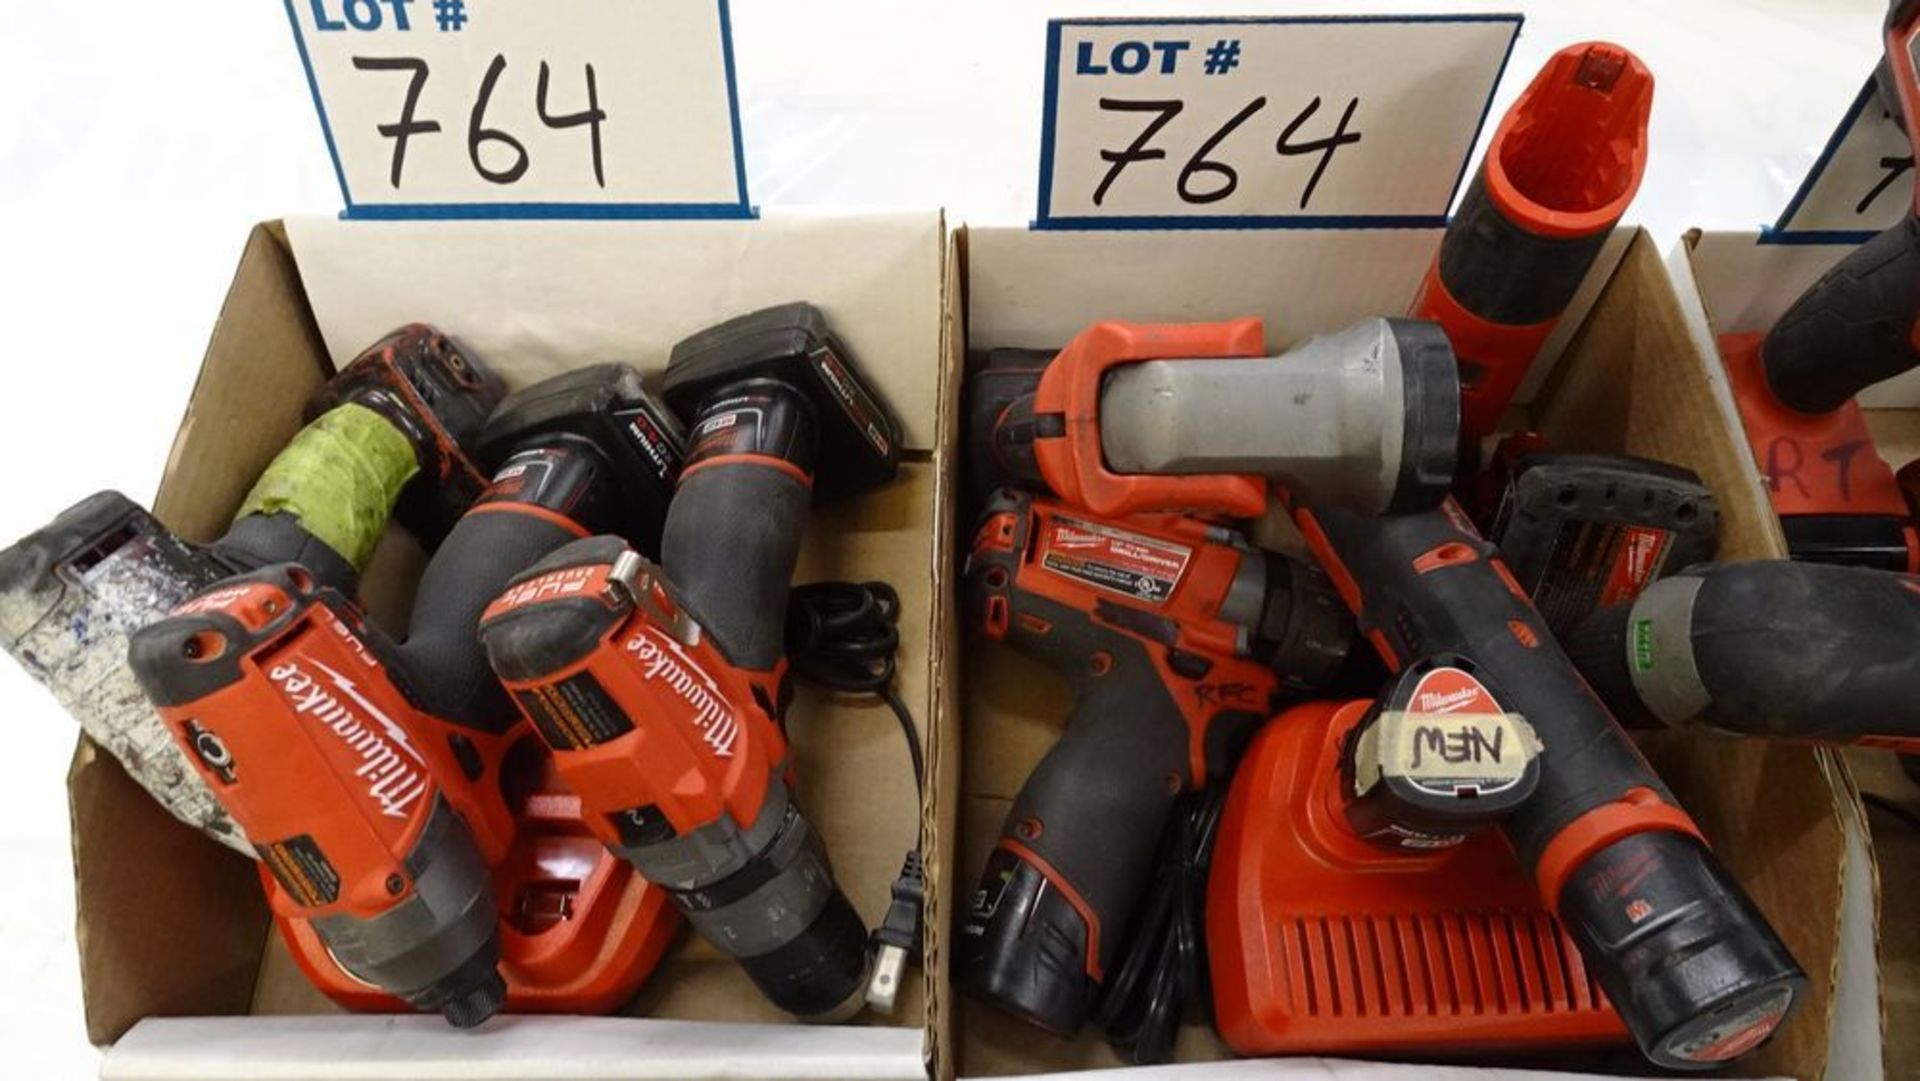 LOT MILWAUKEE ASST. CORDLESS TOOLS W/ CHARGERS (4 BOXES) (REUTER) - Image 2 of 3